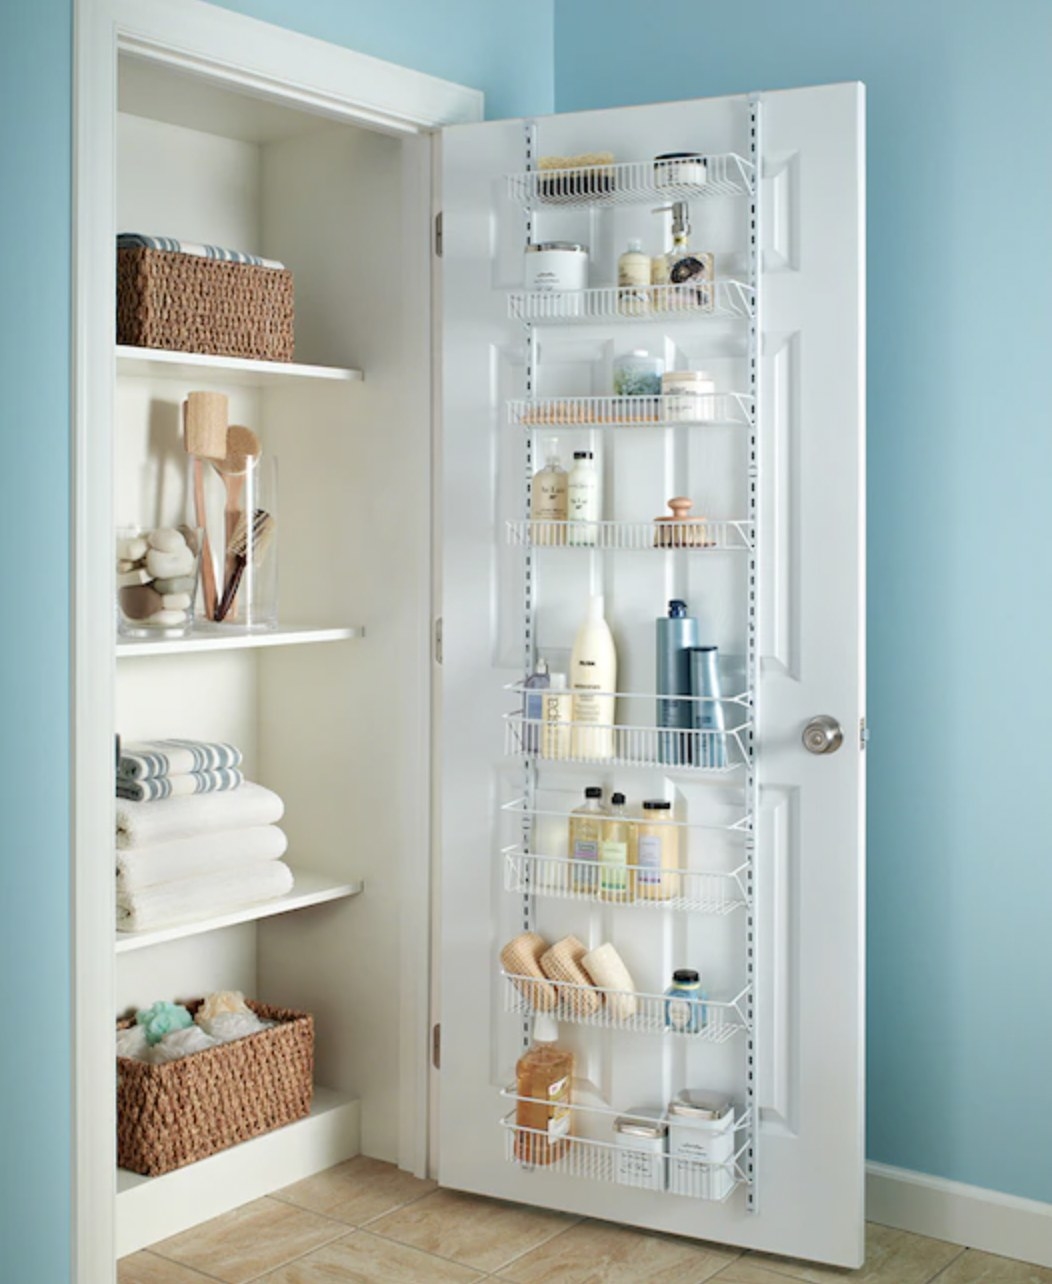 the over-the-door organizer filled with bathroom supplies